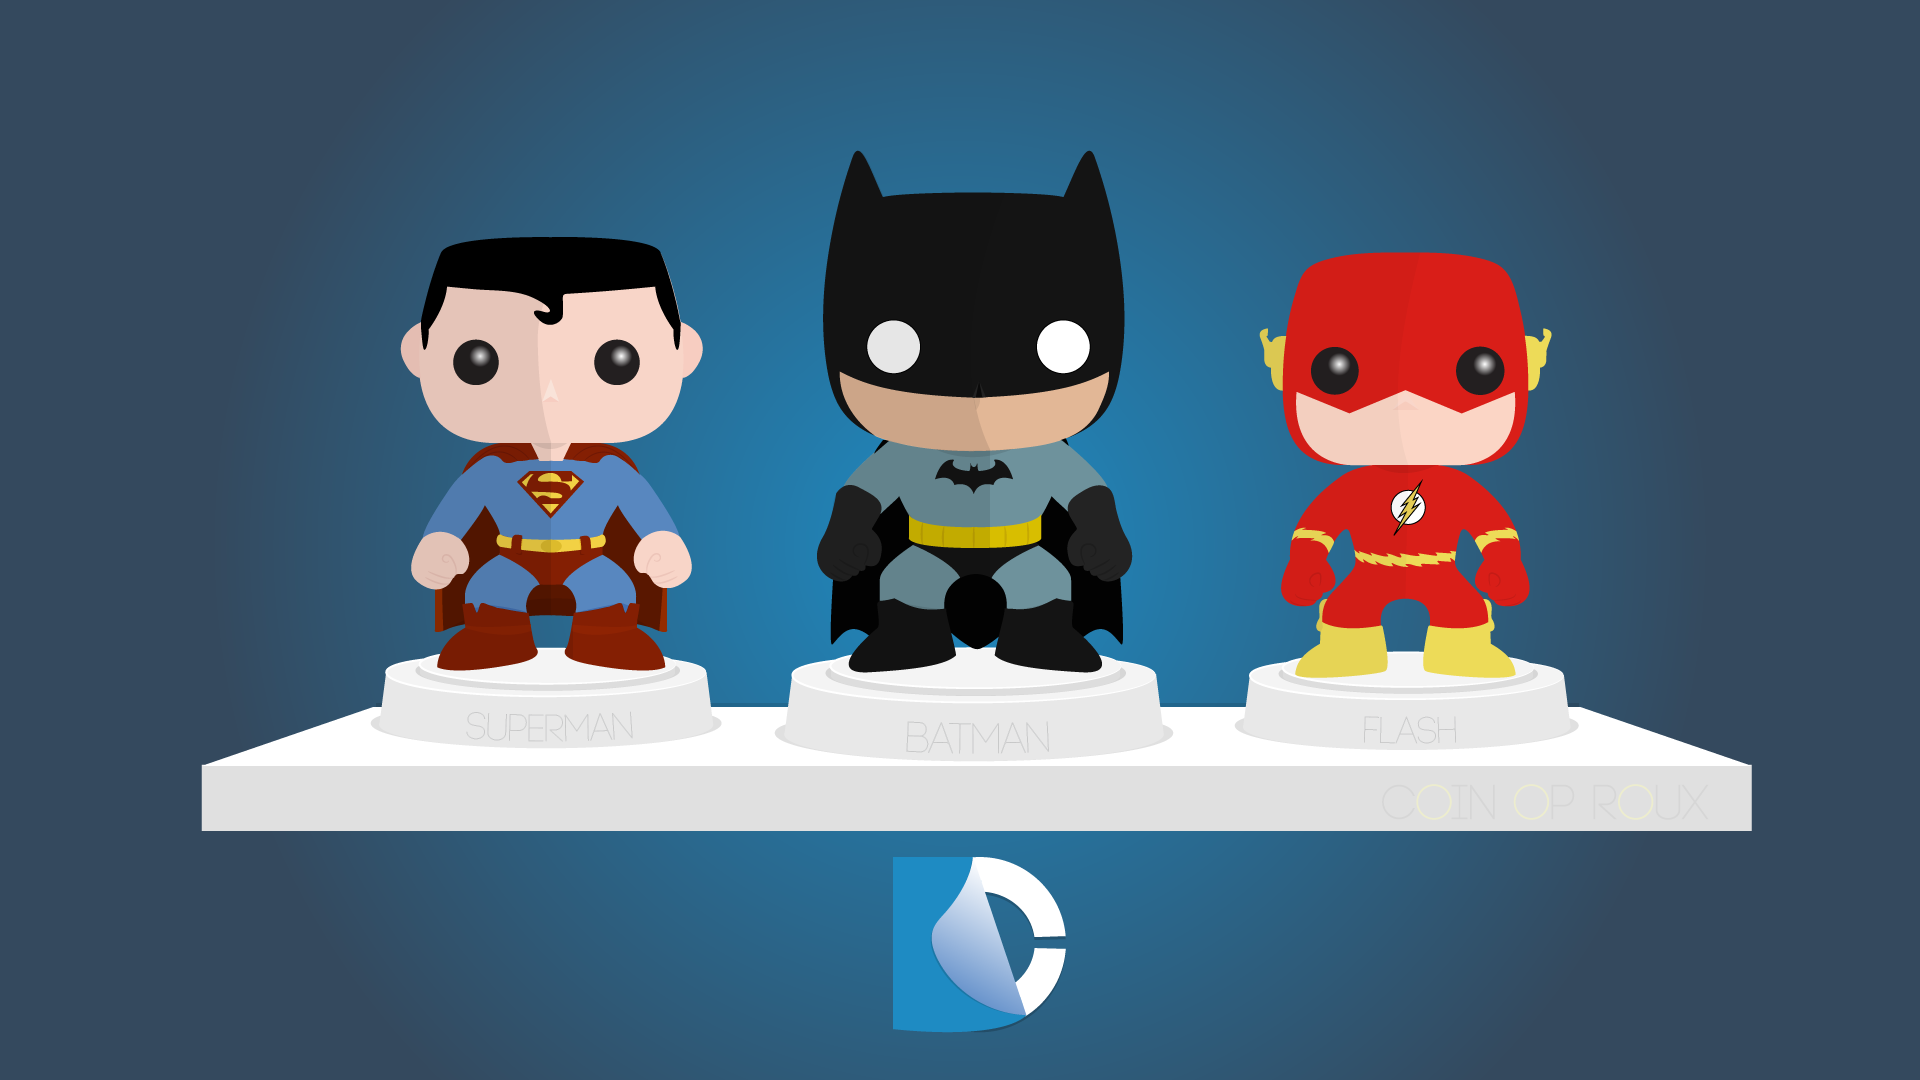 DC FunkoFlat Wallpaper by CoinOpRoux on DeviantArt